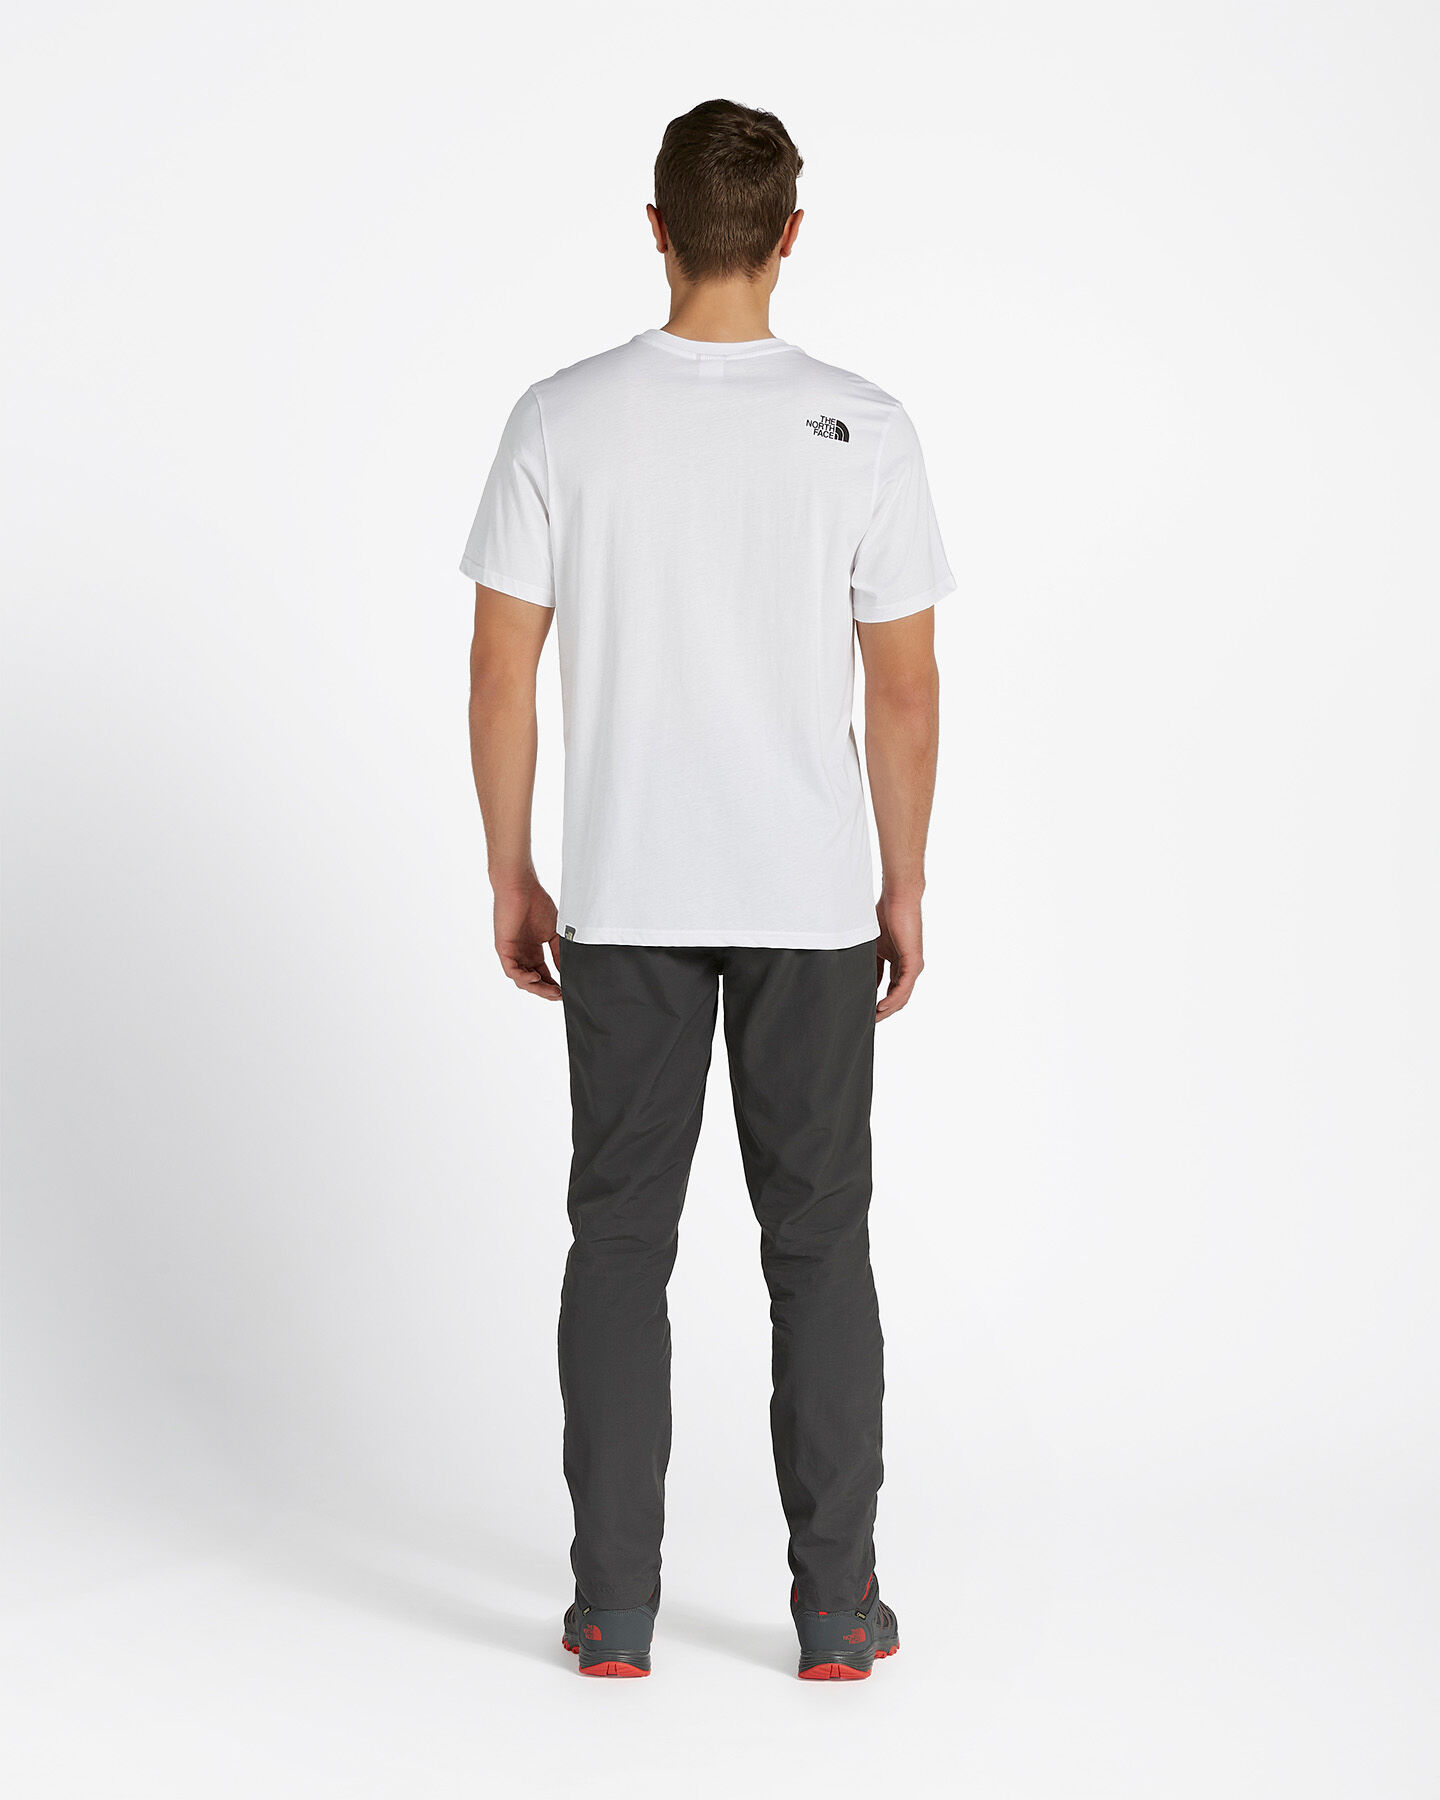  T-Shirt THE NORTH FACE SIMPLE DOME M S5015381|FN4|XXS scatto 2